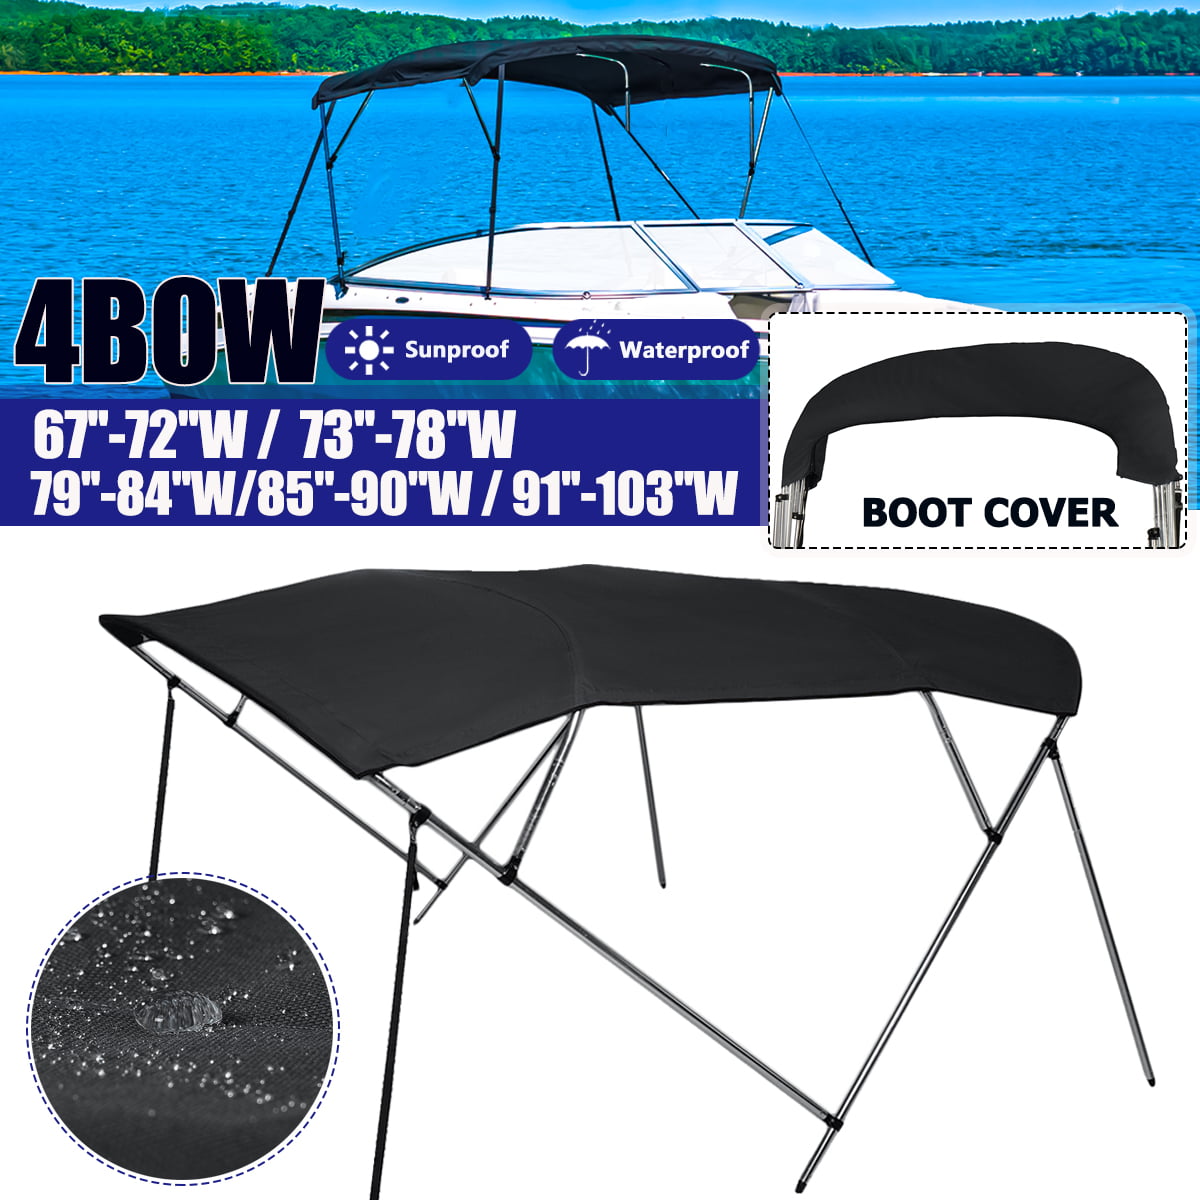 Boat Bimini Top 3 Bow 72"L 46"H 85"-90"W With Boot and rear support poles 